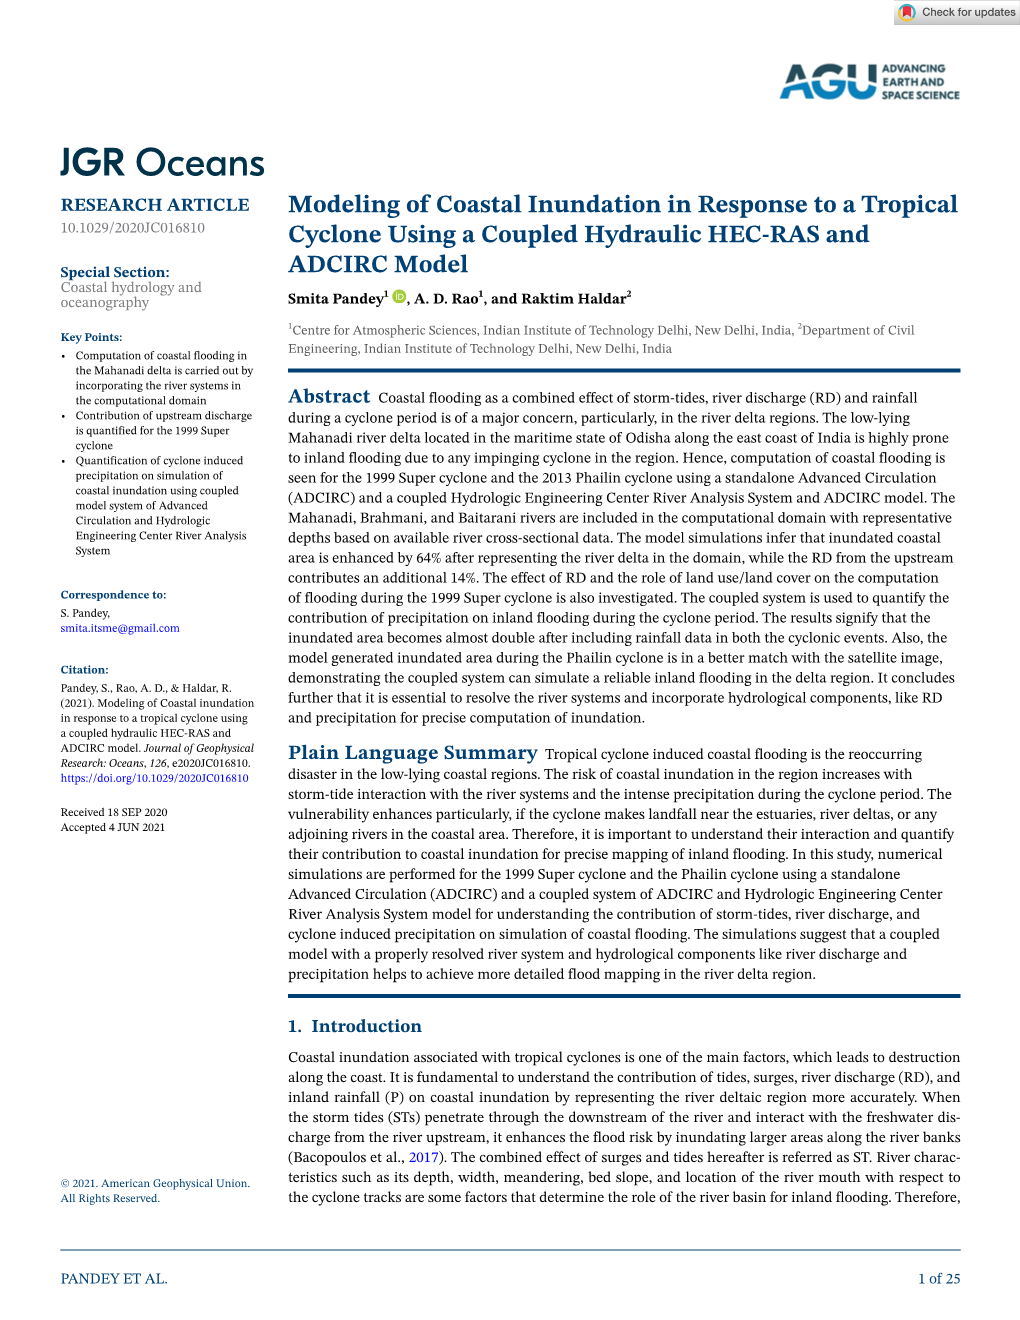 Modeling of Coastal Inundation in Response to a Tropical Cyclone